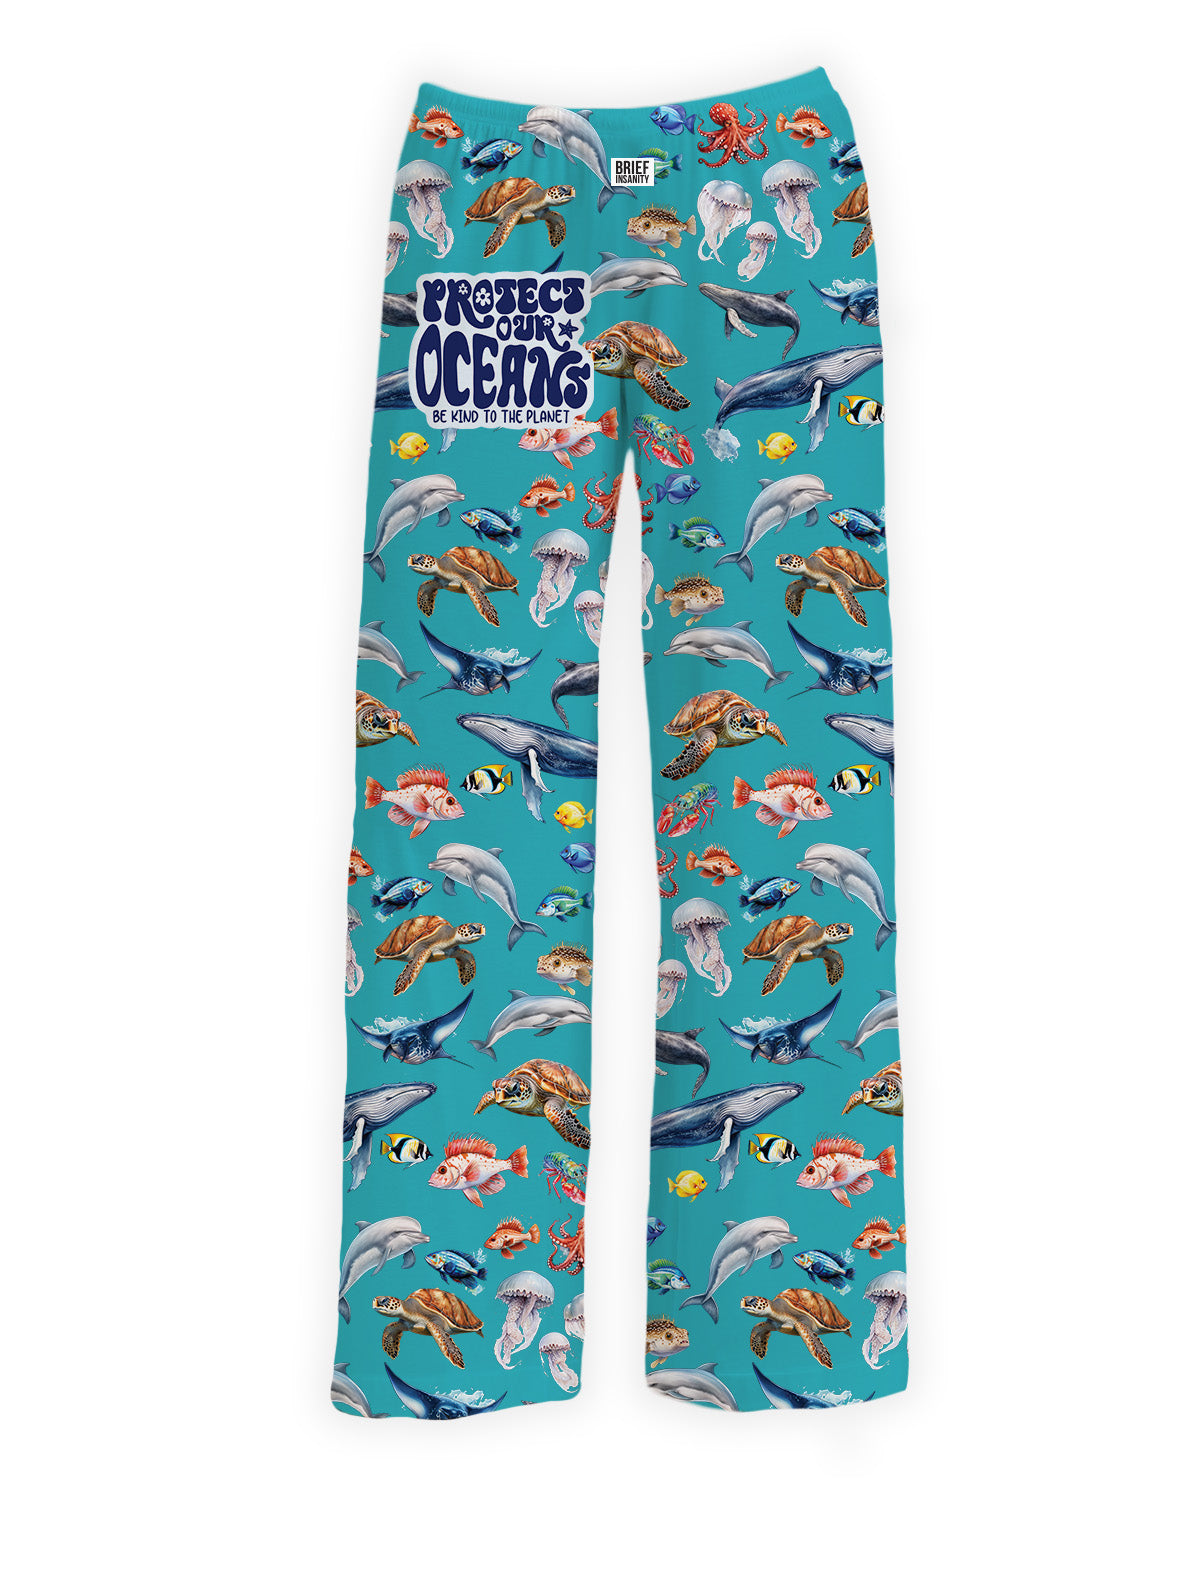 BRIEF INSANITY's Protect Our Oceans Pajama Lounge Pants